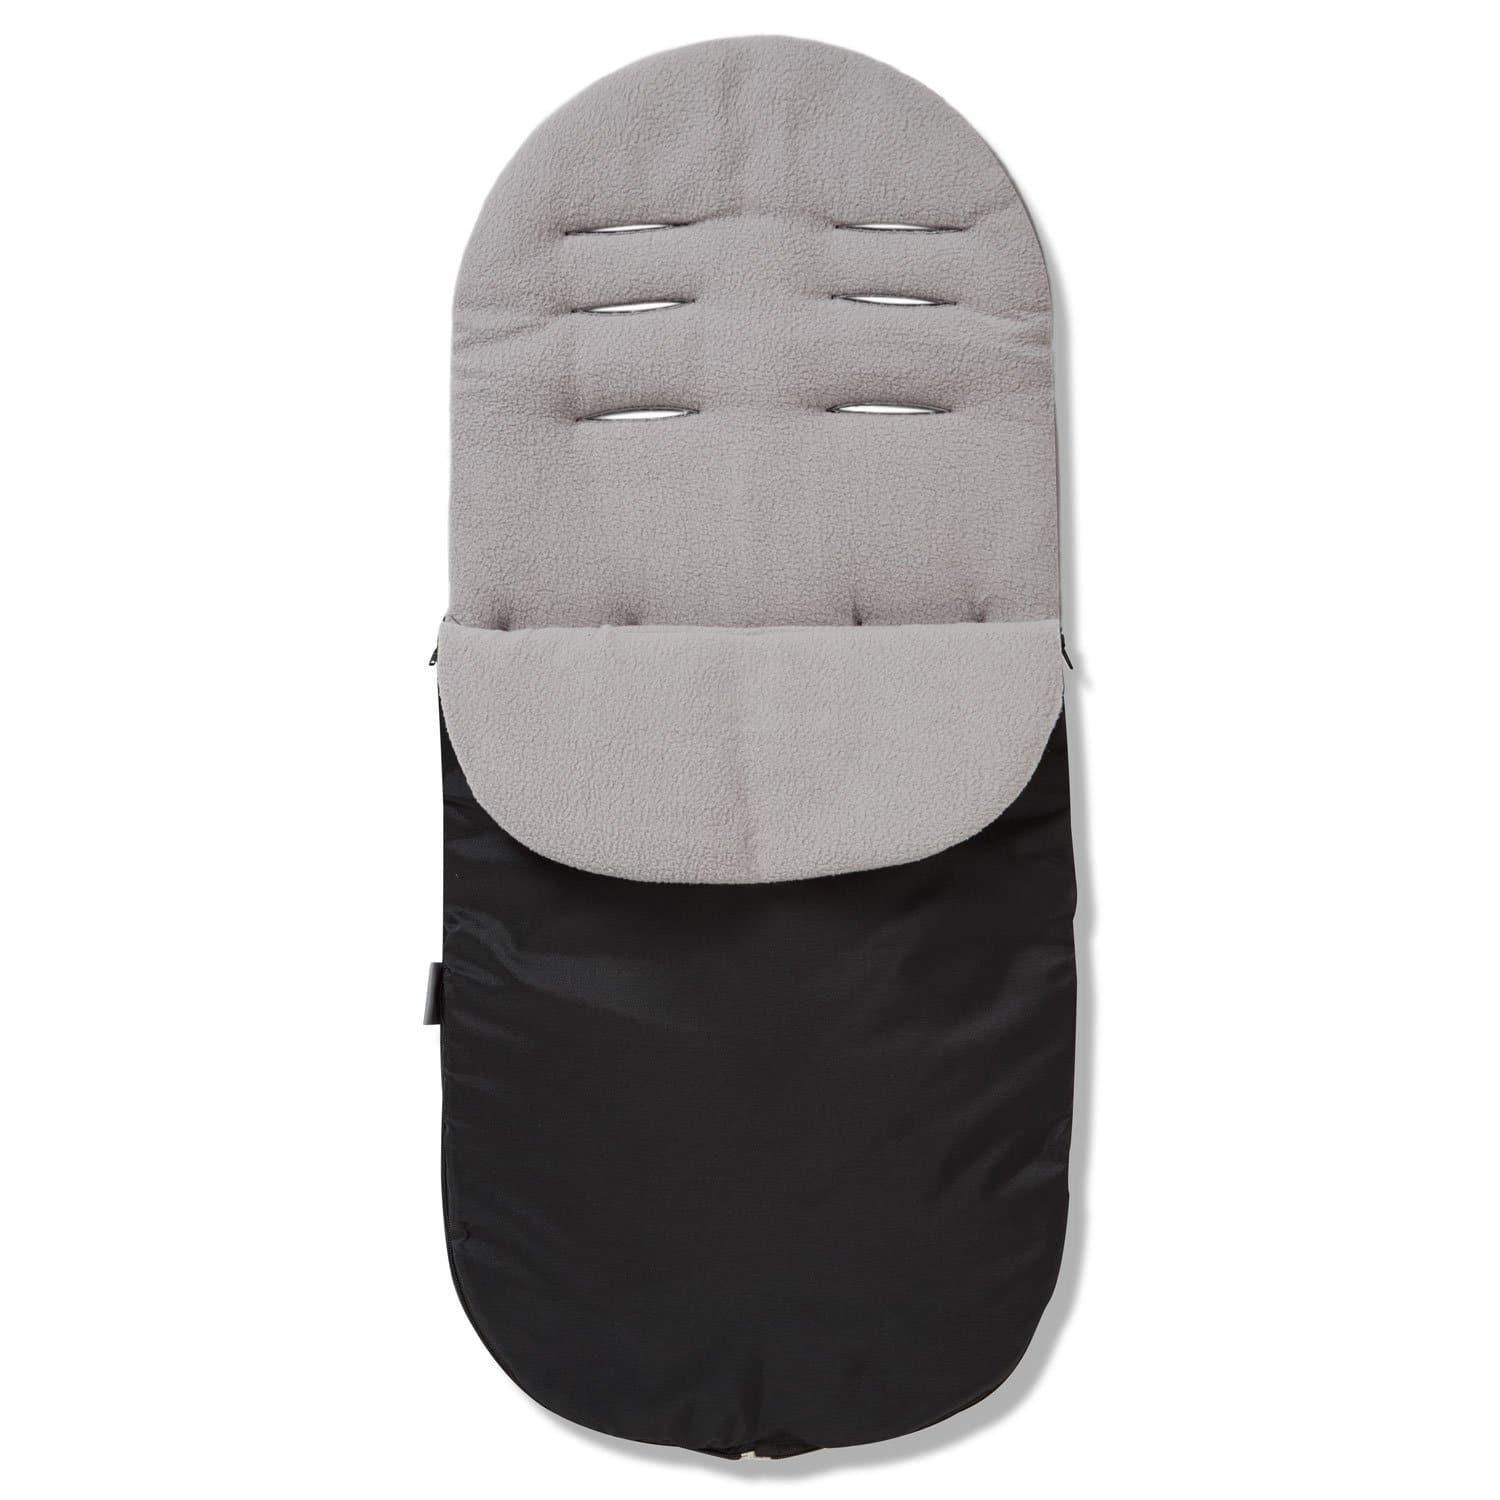 Footmuff / Cosy Toes Compatible with Kinderkraft - Grey / Fits All Models | For Your Little One